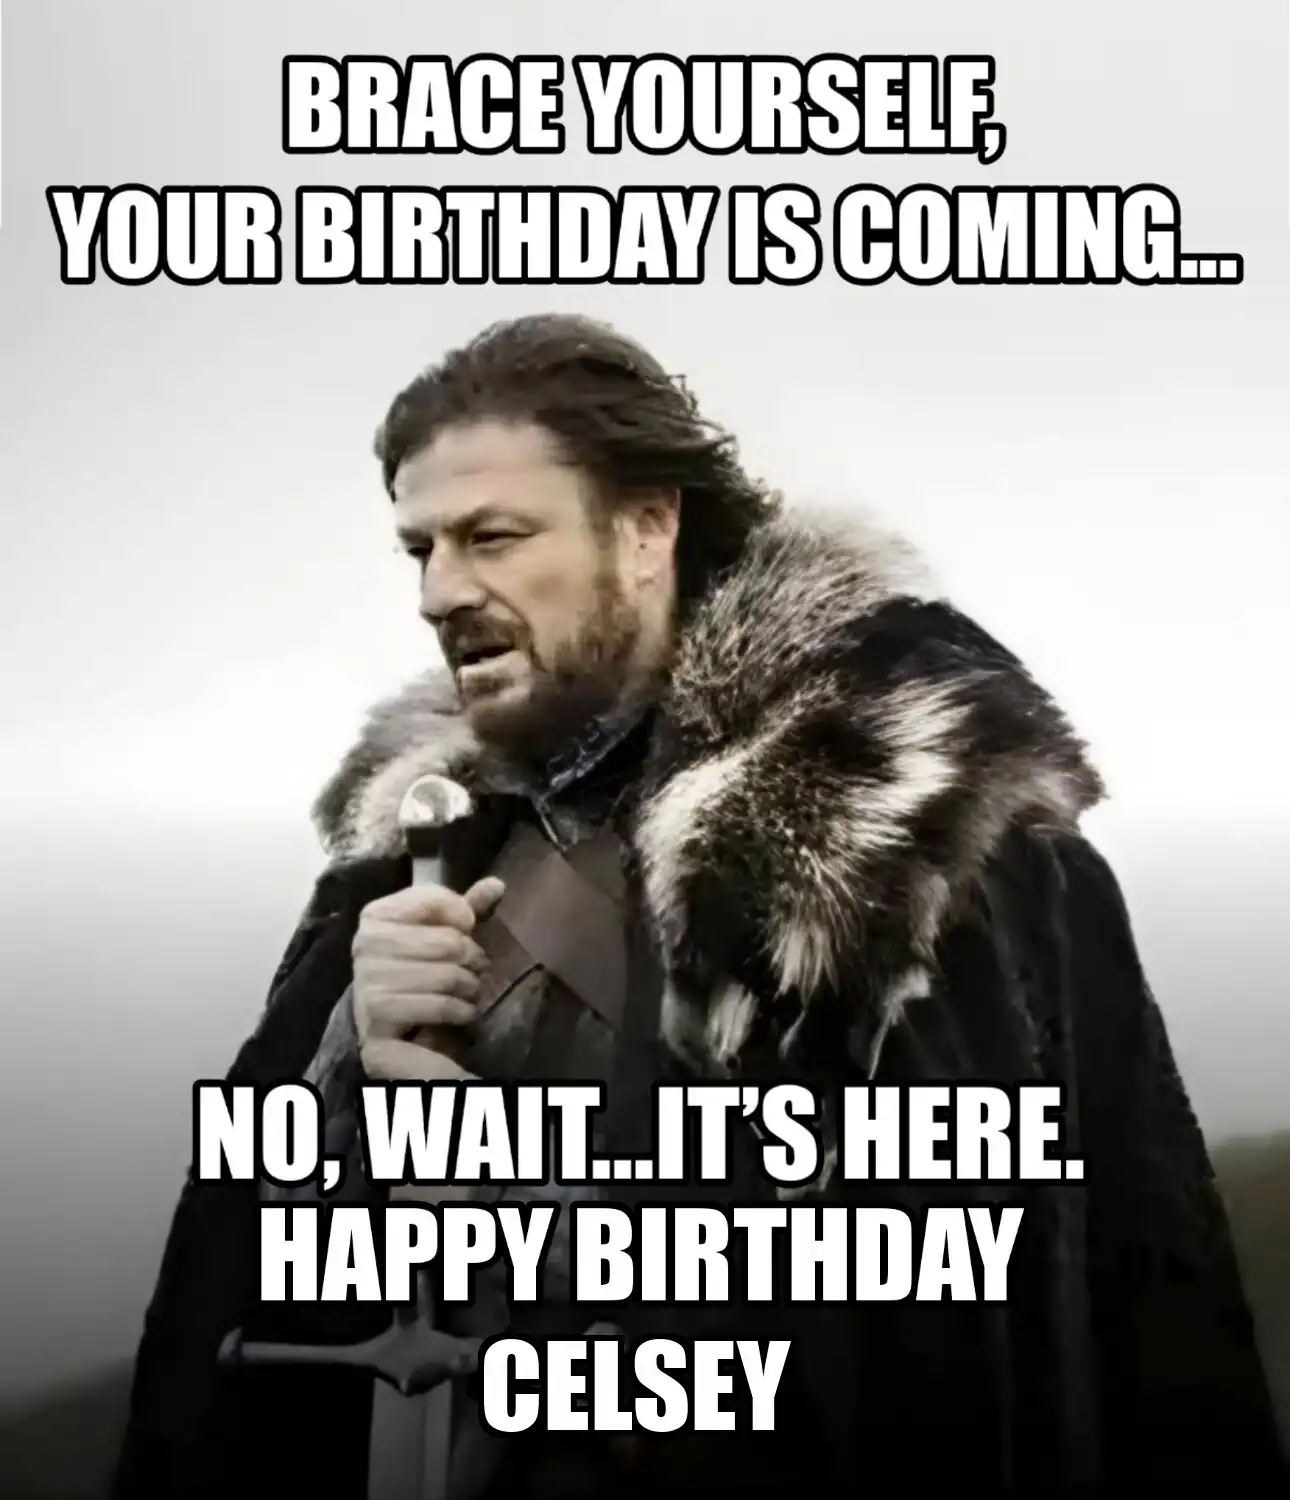 Happy Birthday Celsey Brace Yourself Your Birthday Is Coming Meme